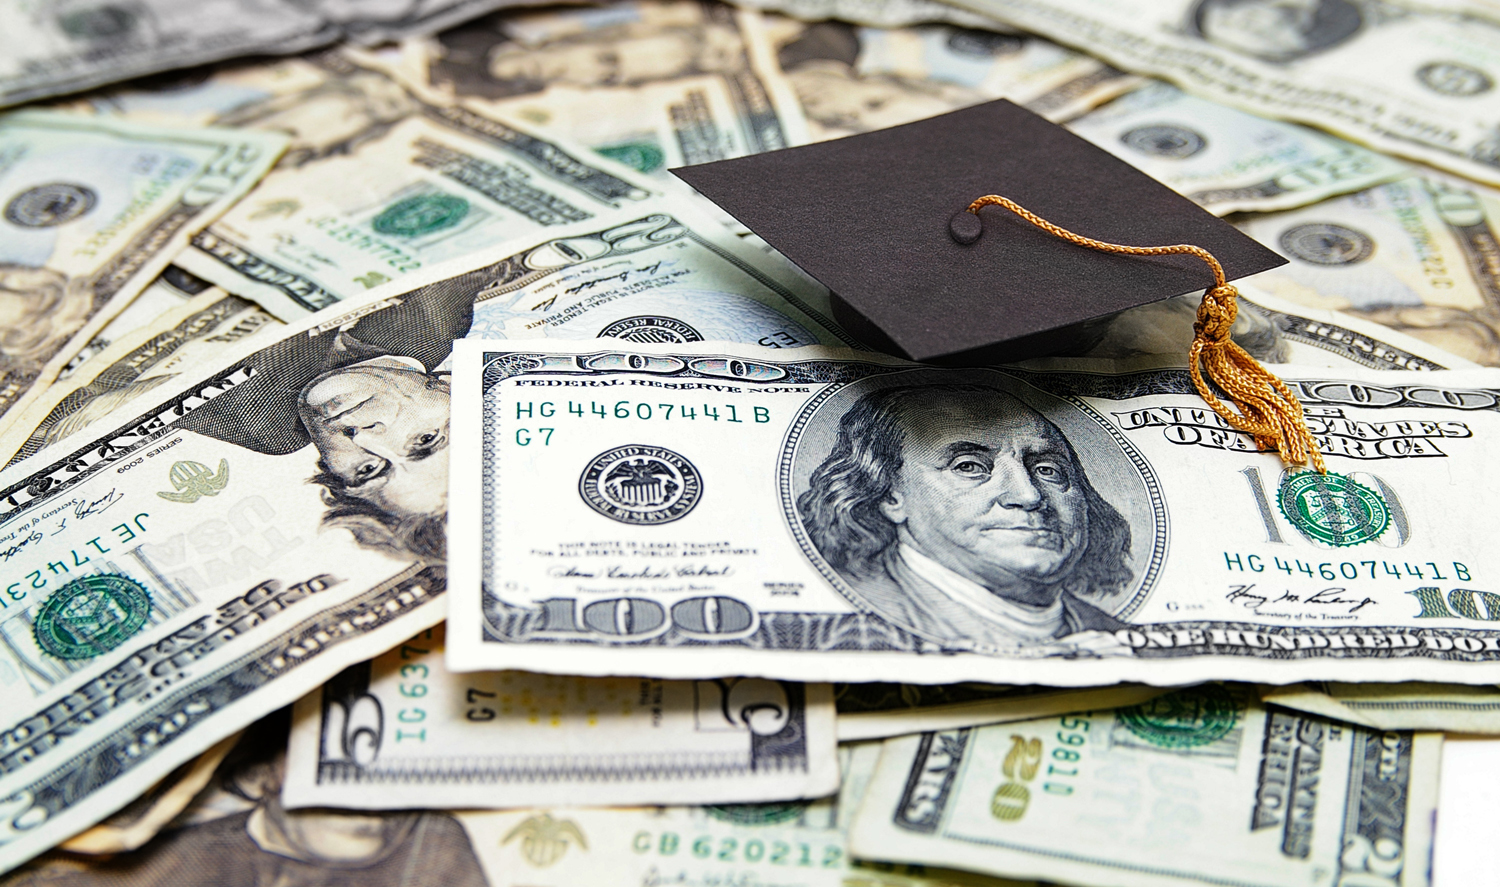 Best Student Loan Refinance Services To Consolidate College Debt